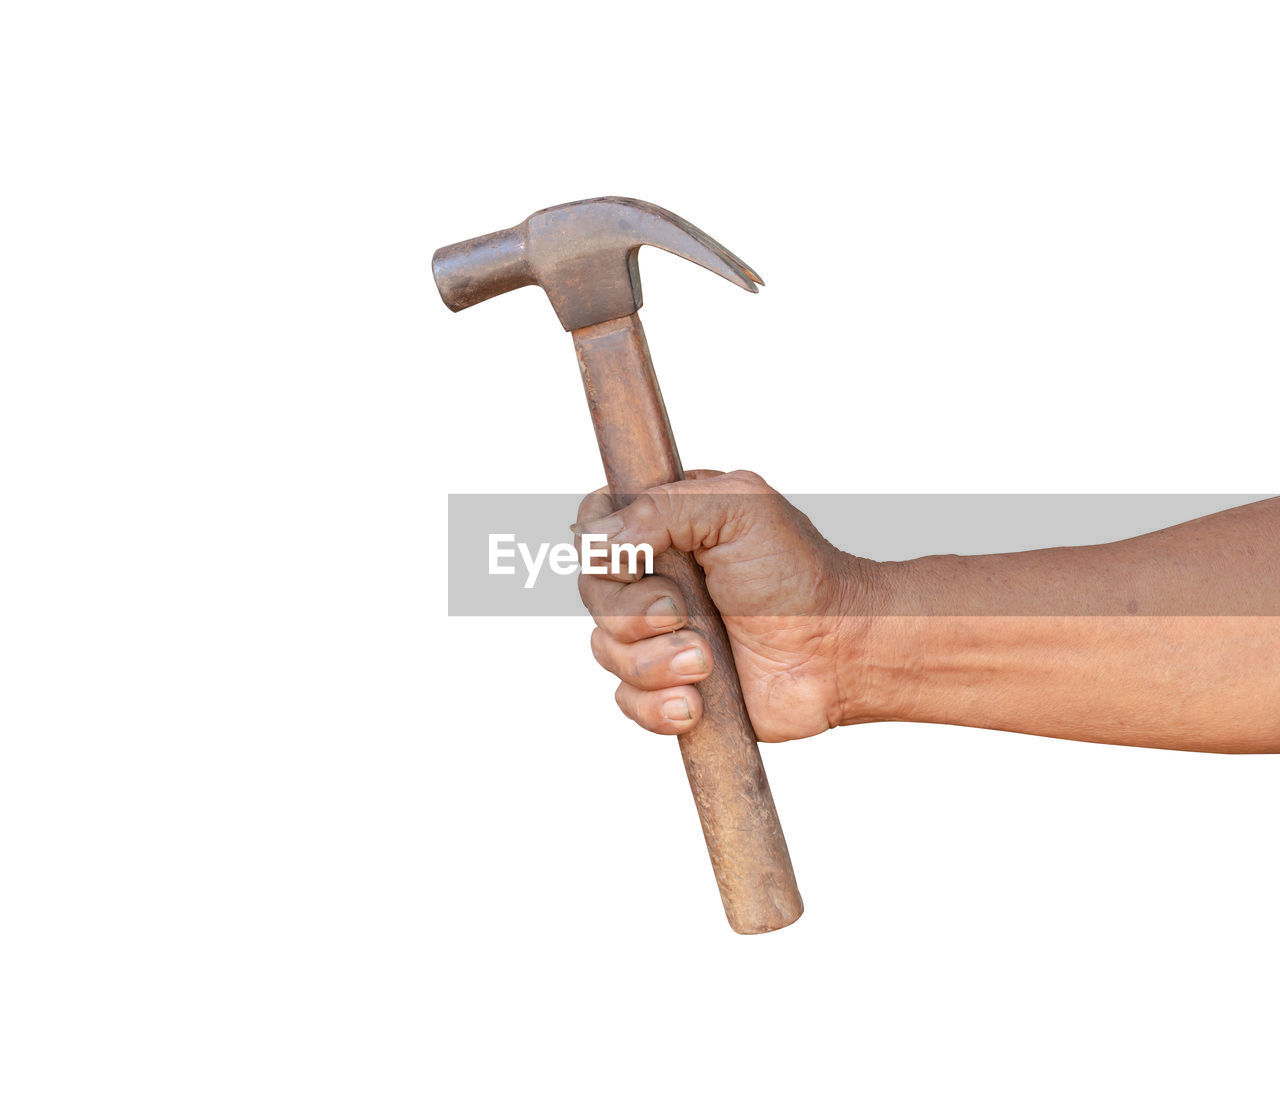 Close-up of hand holding hammer against white background